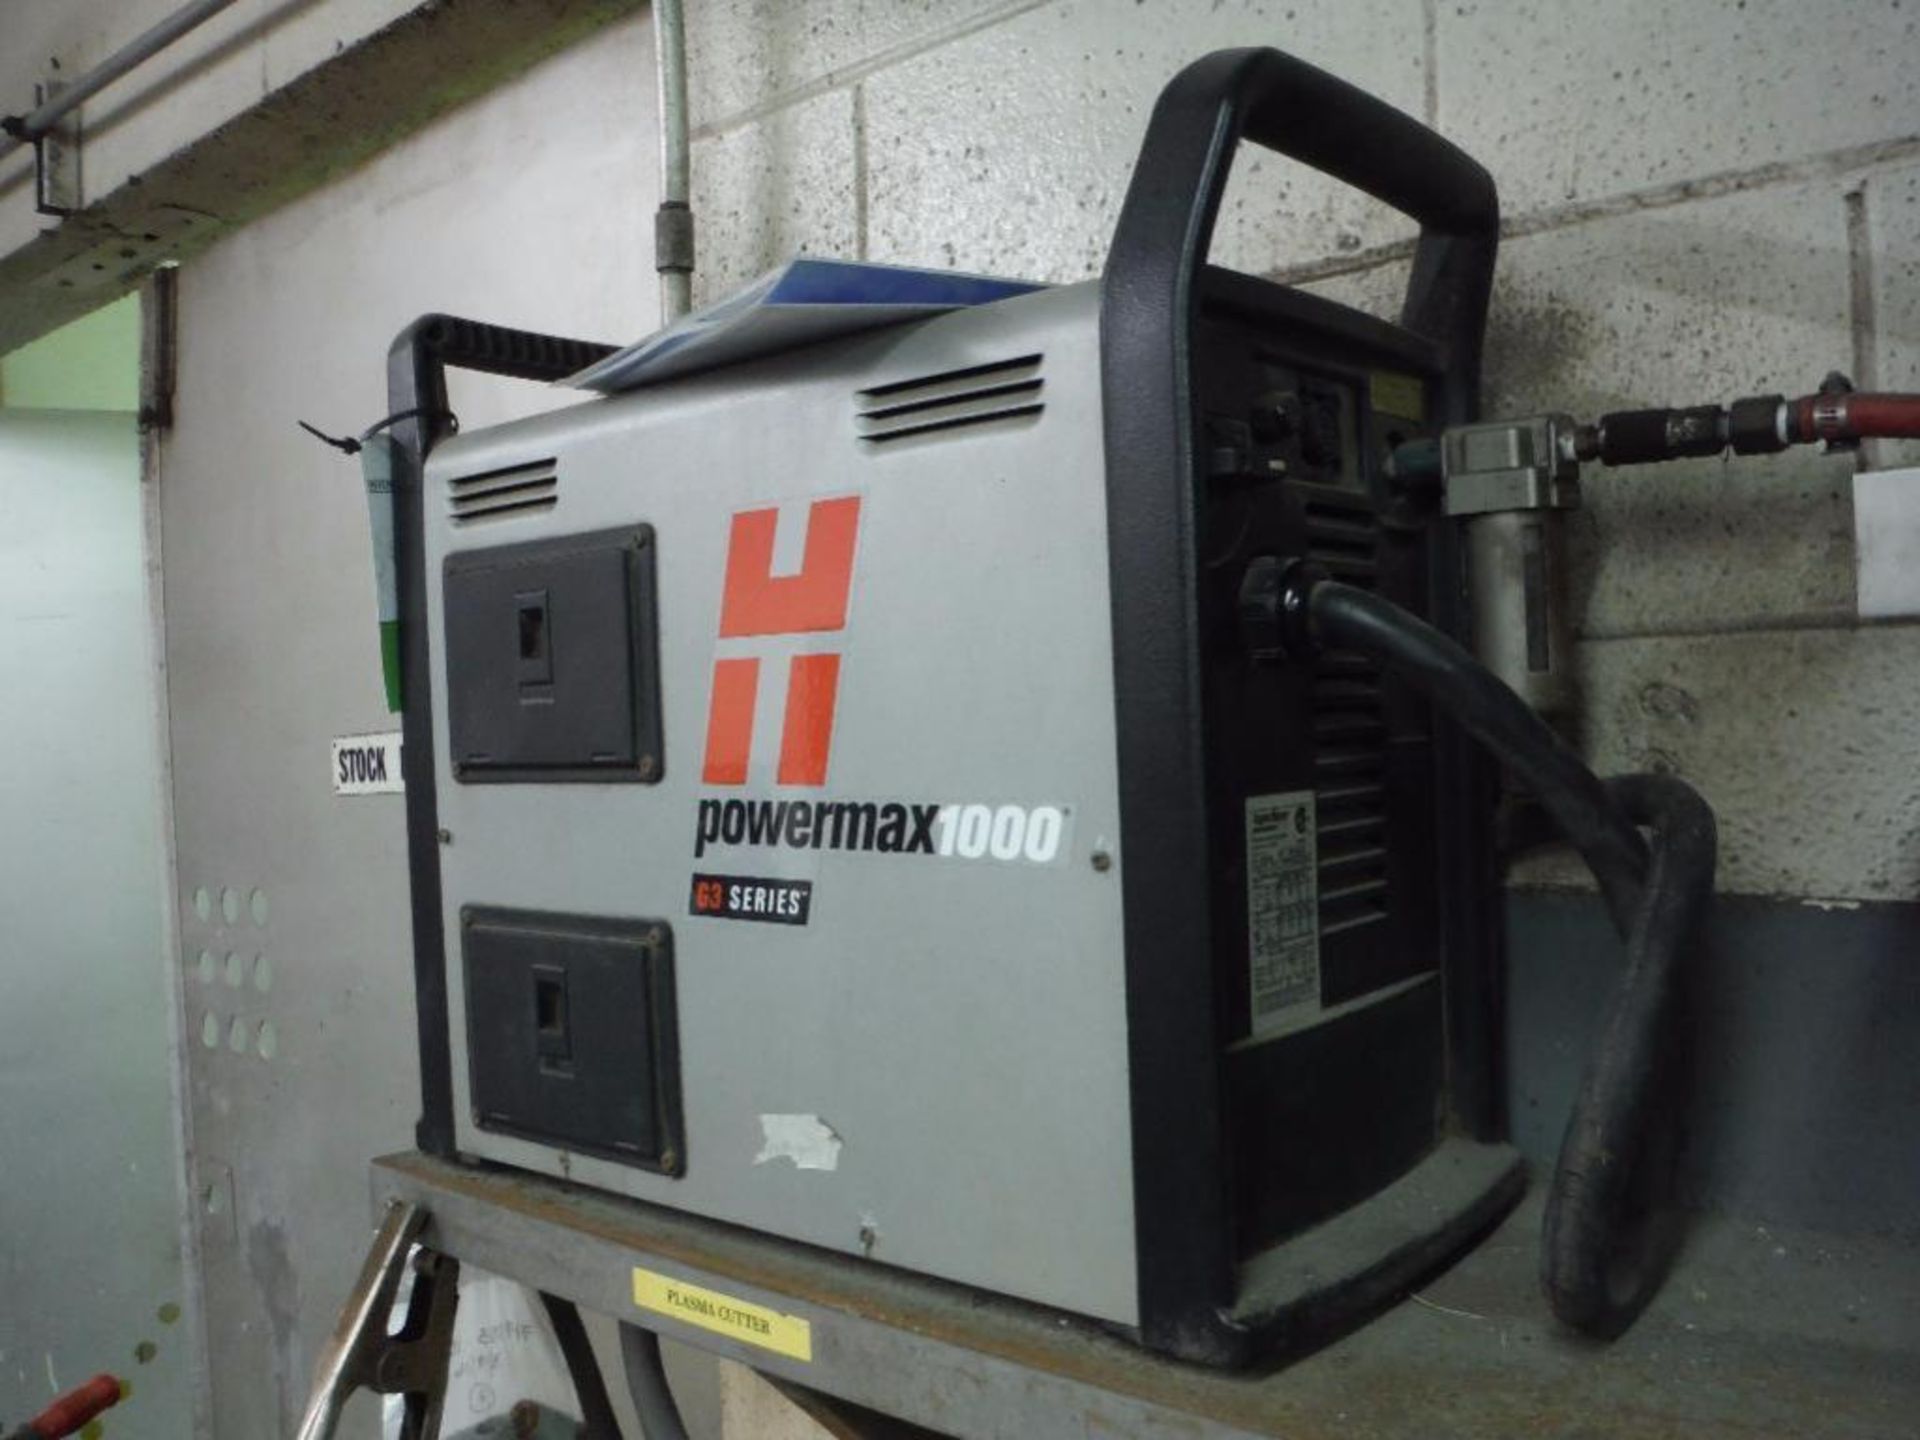 Hypotherm powermax1000 plasma cutter ** Rigging Fee: $15 ** - Image 2 of 7